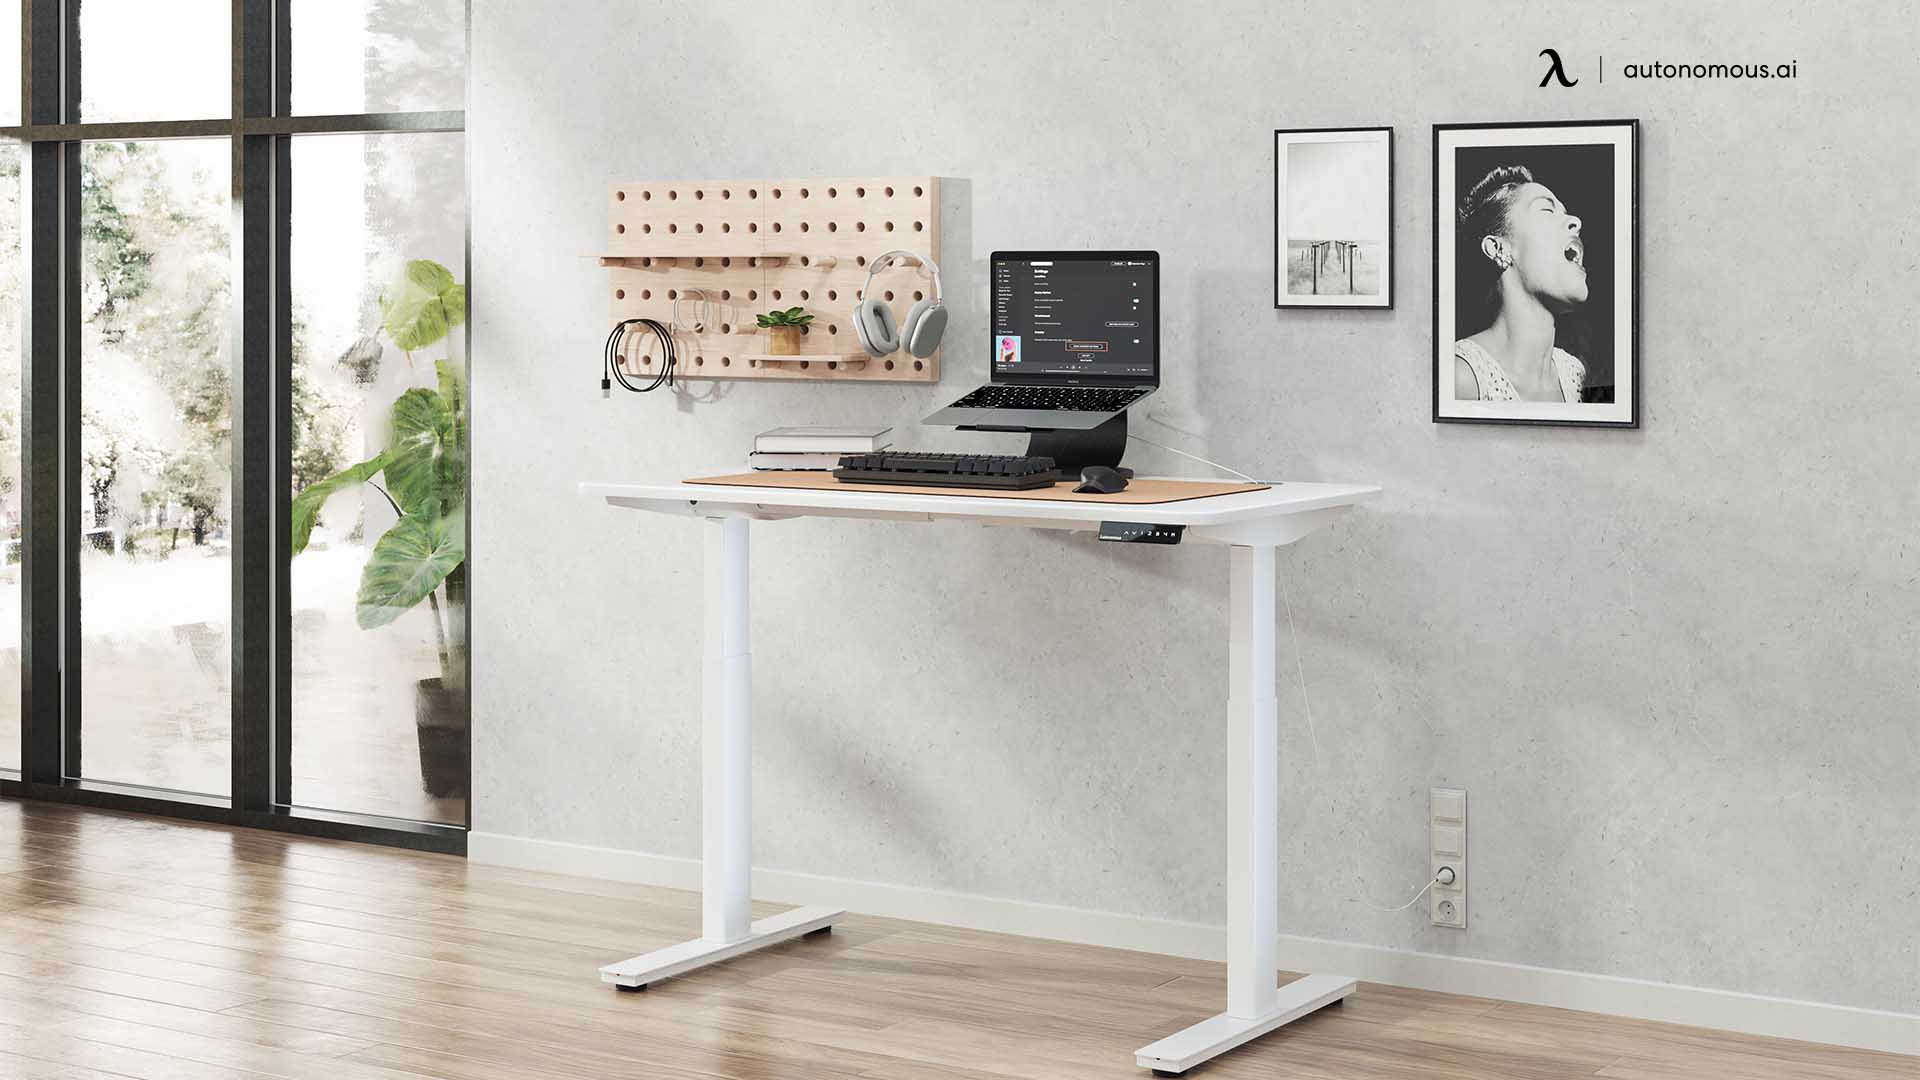 Ergonomic Products in white home office